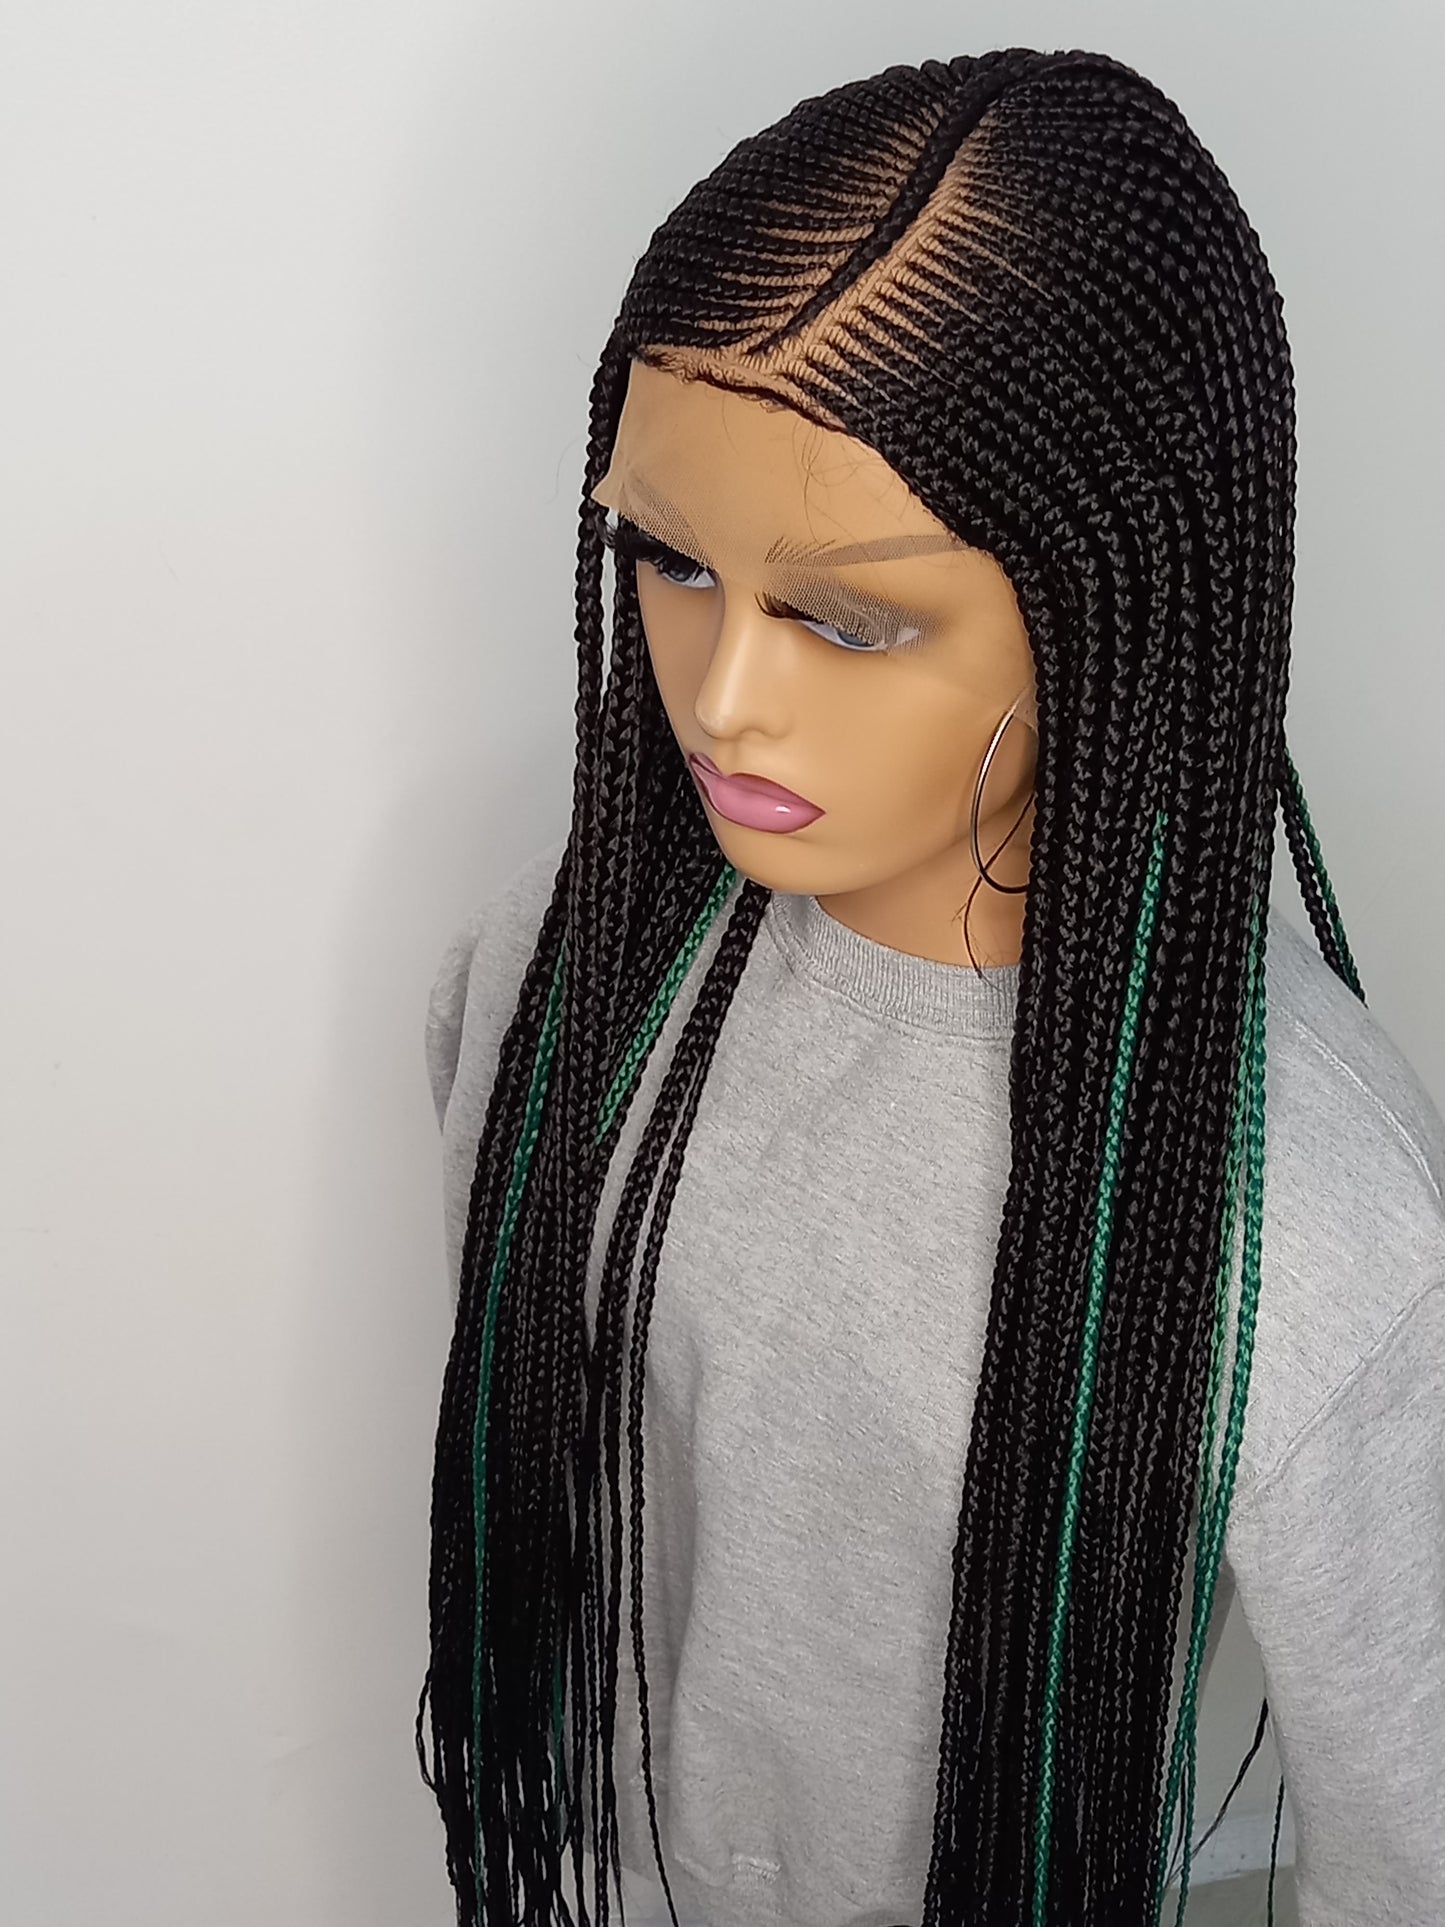 Stunning Cornrow Wigs on 13 by 6 Lace Front for Black Women: Handmade, Synthetic, and Braided Options Available